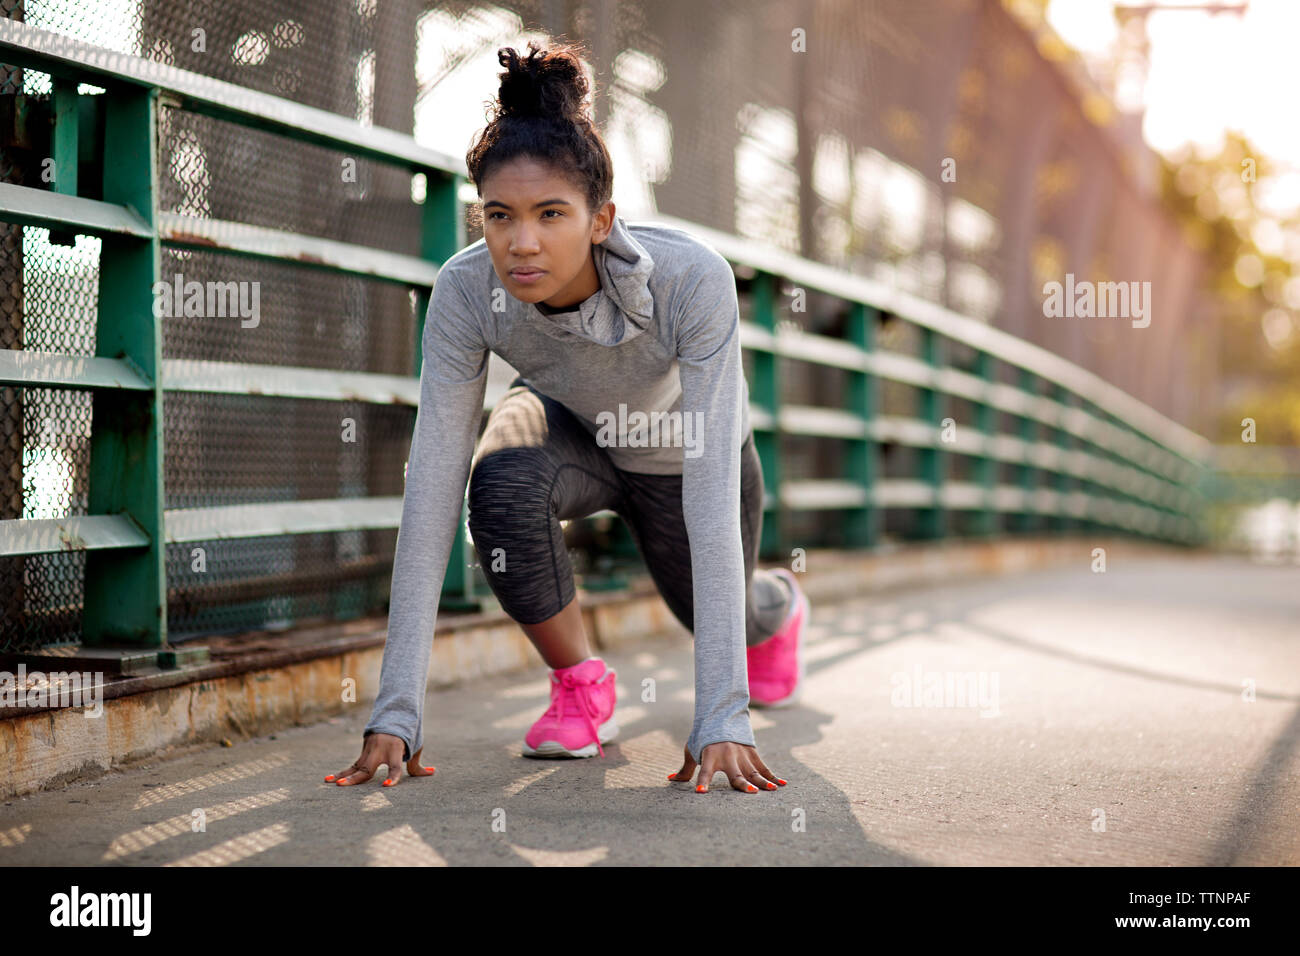 Determined female jogger on footpath Stock Photo